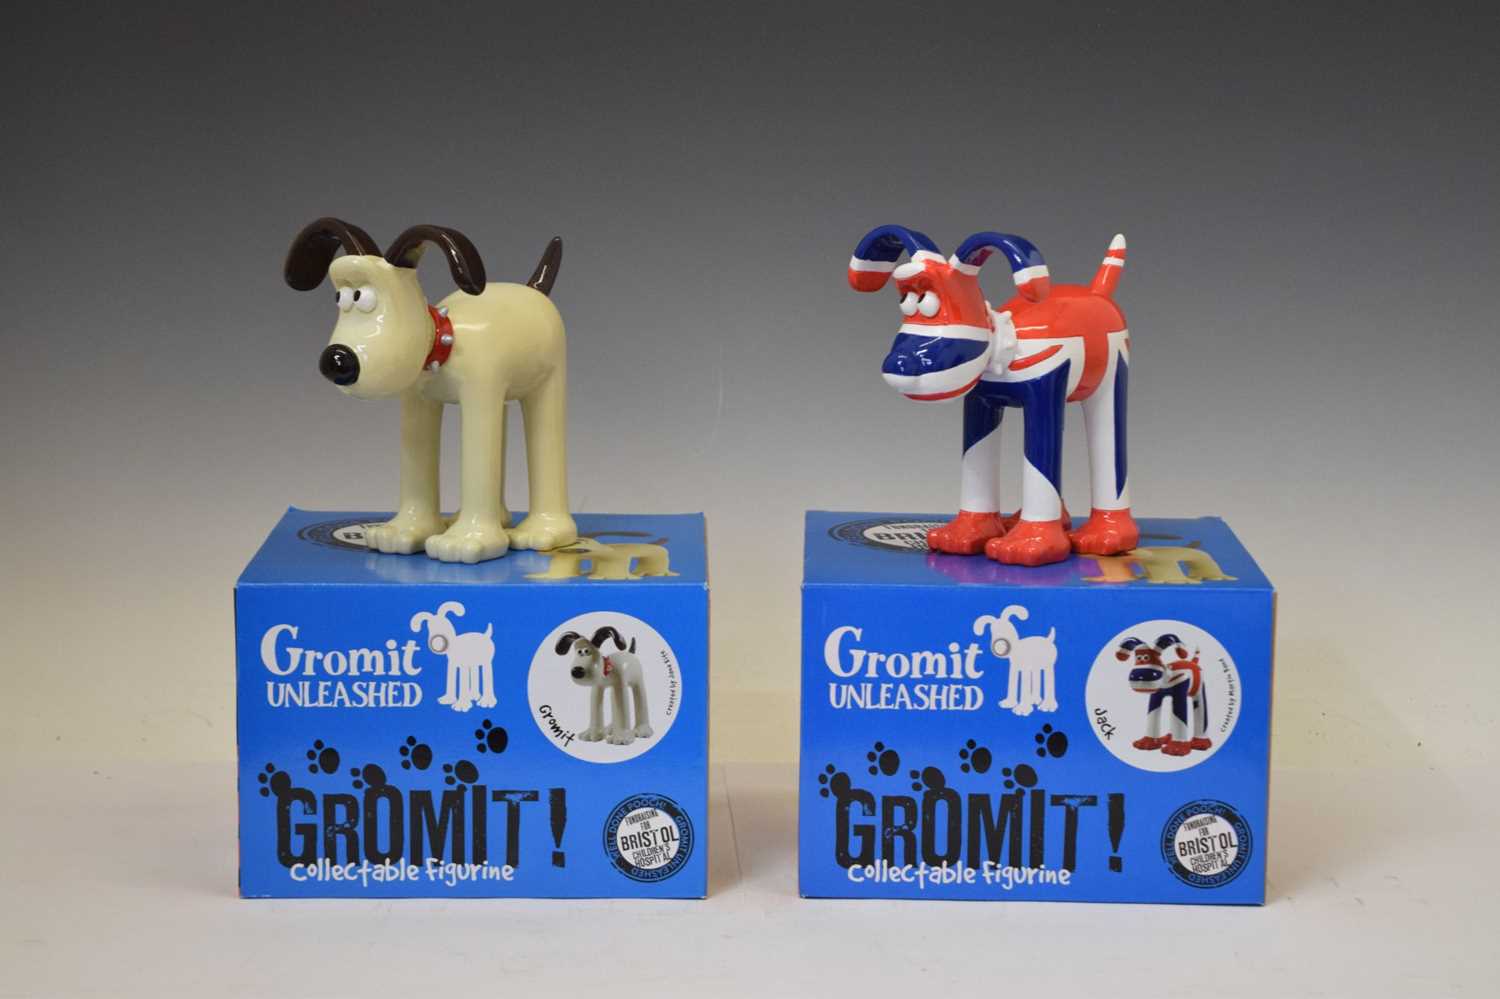 Aardman/Wallace and Gromit - 'Gromit Unleashed' figures - Image 2 of 8